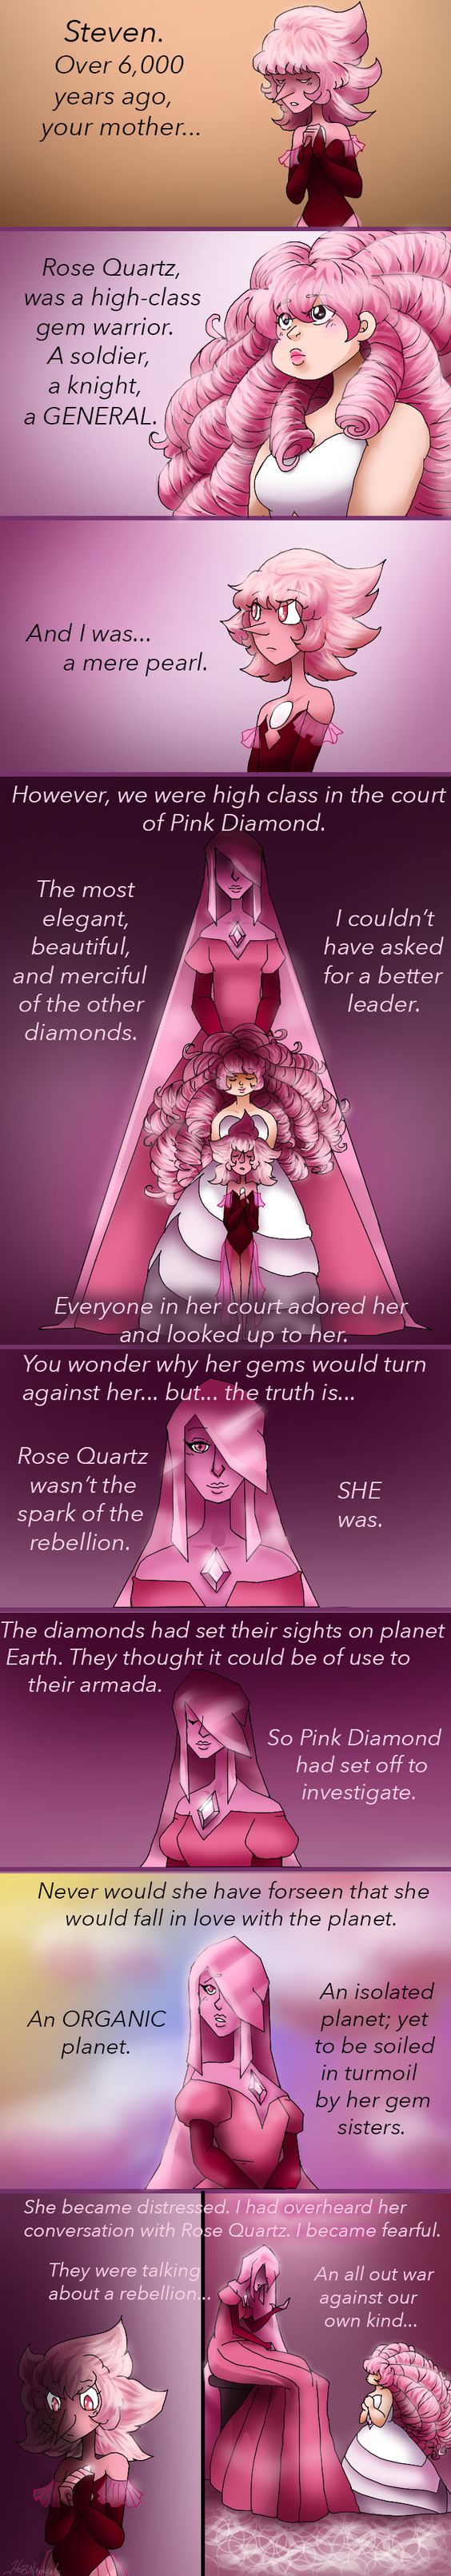 Pink Diamond's tale p1 by HezuNeutral